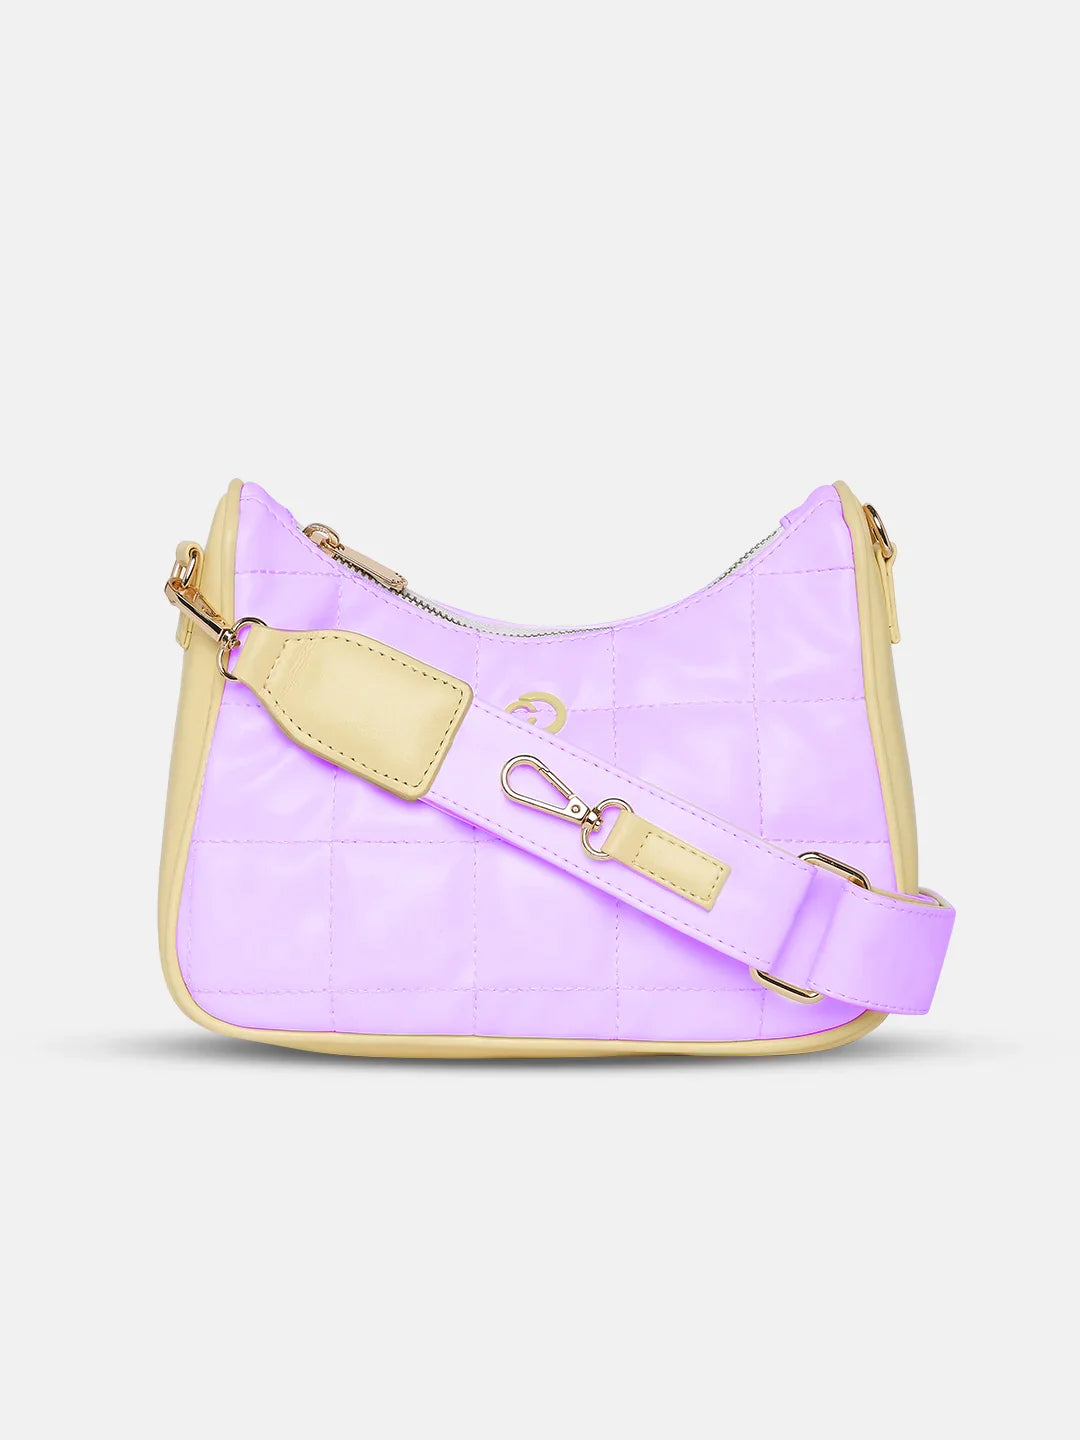 Caprese Aurora Color Changing Sling Small Pink